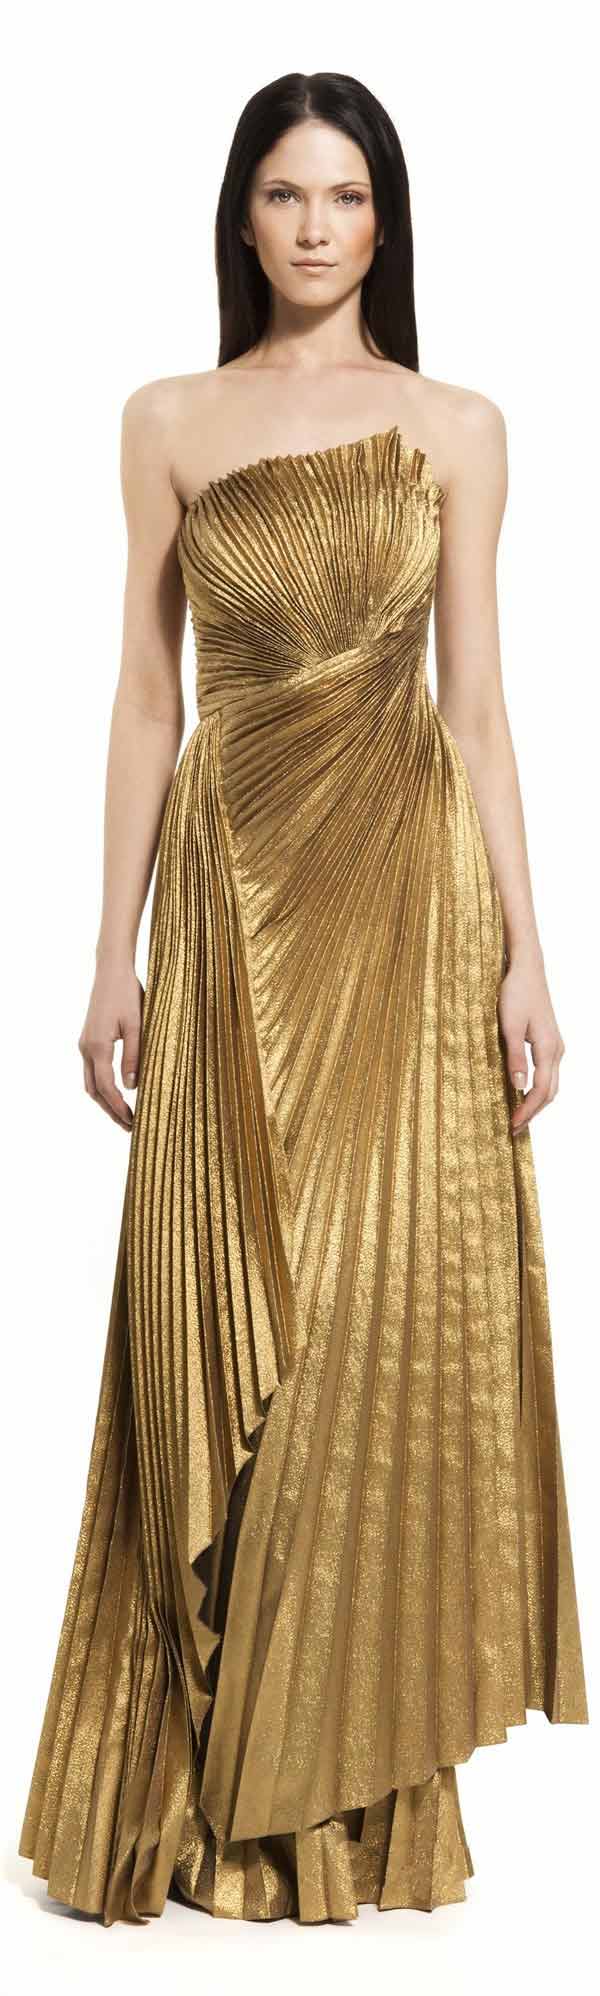 New Year’s Eve dresses 2014